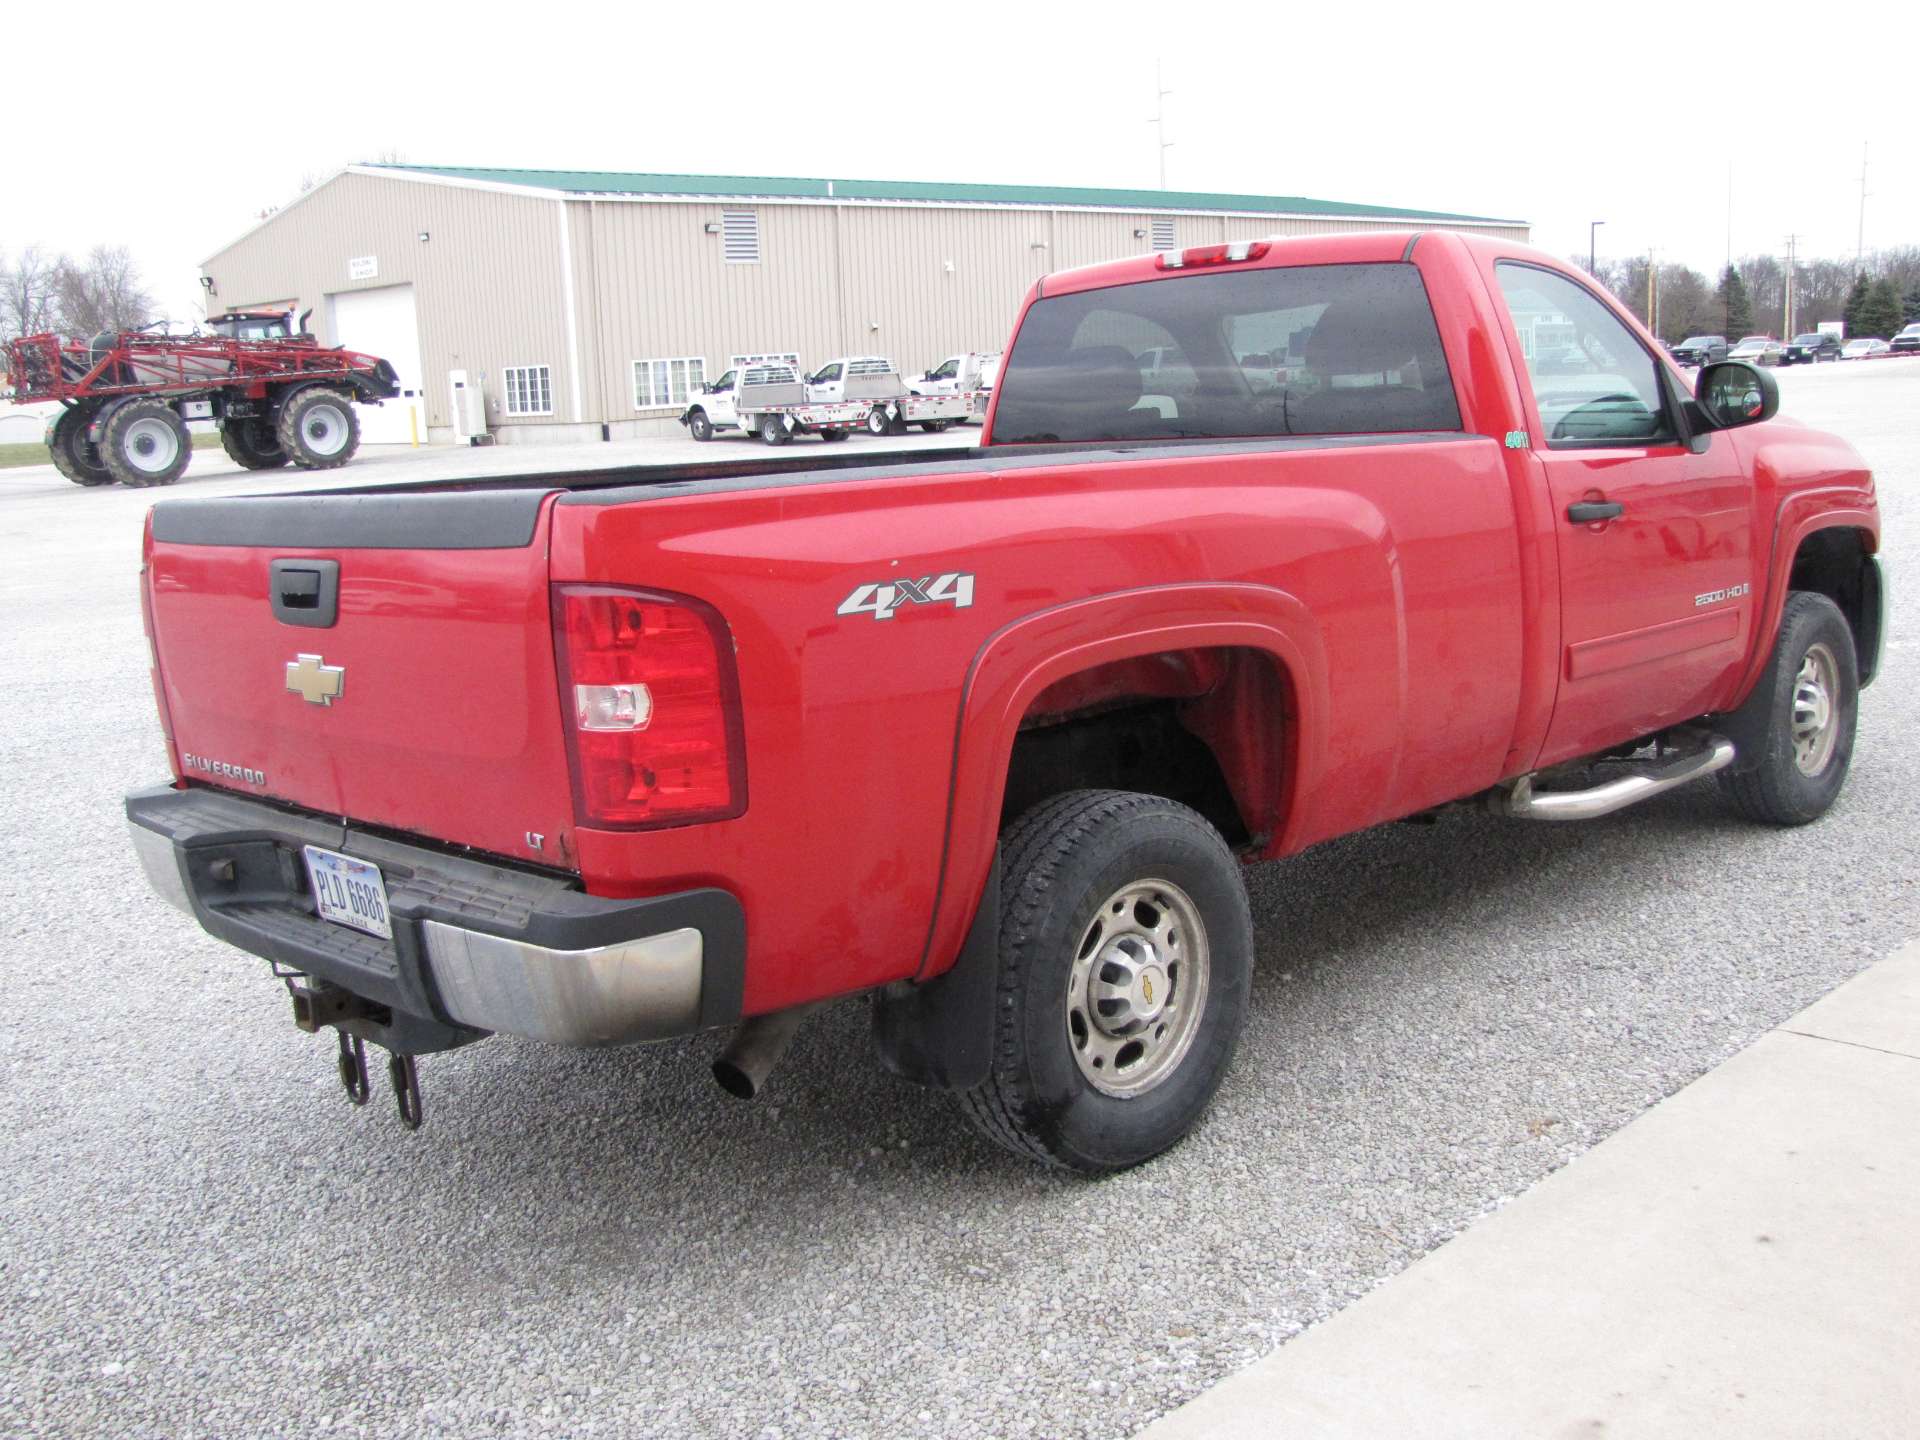 2009 Chevy 2500 HD LT pickup truck - Image 11 of 69